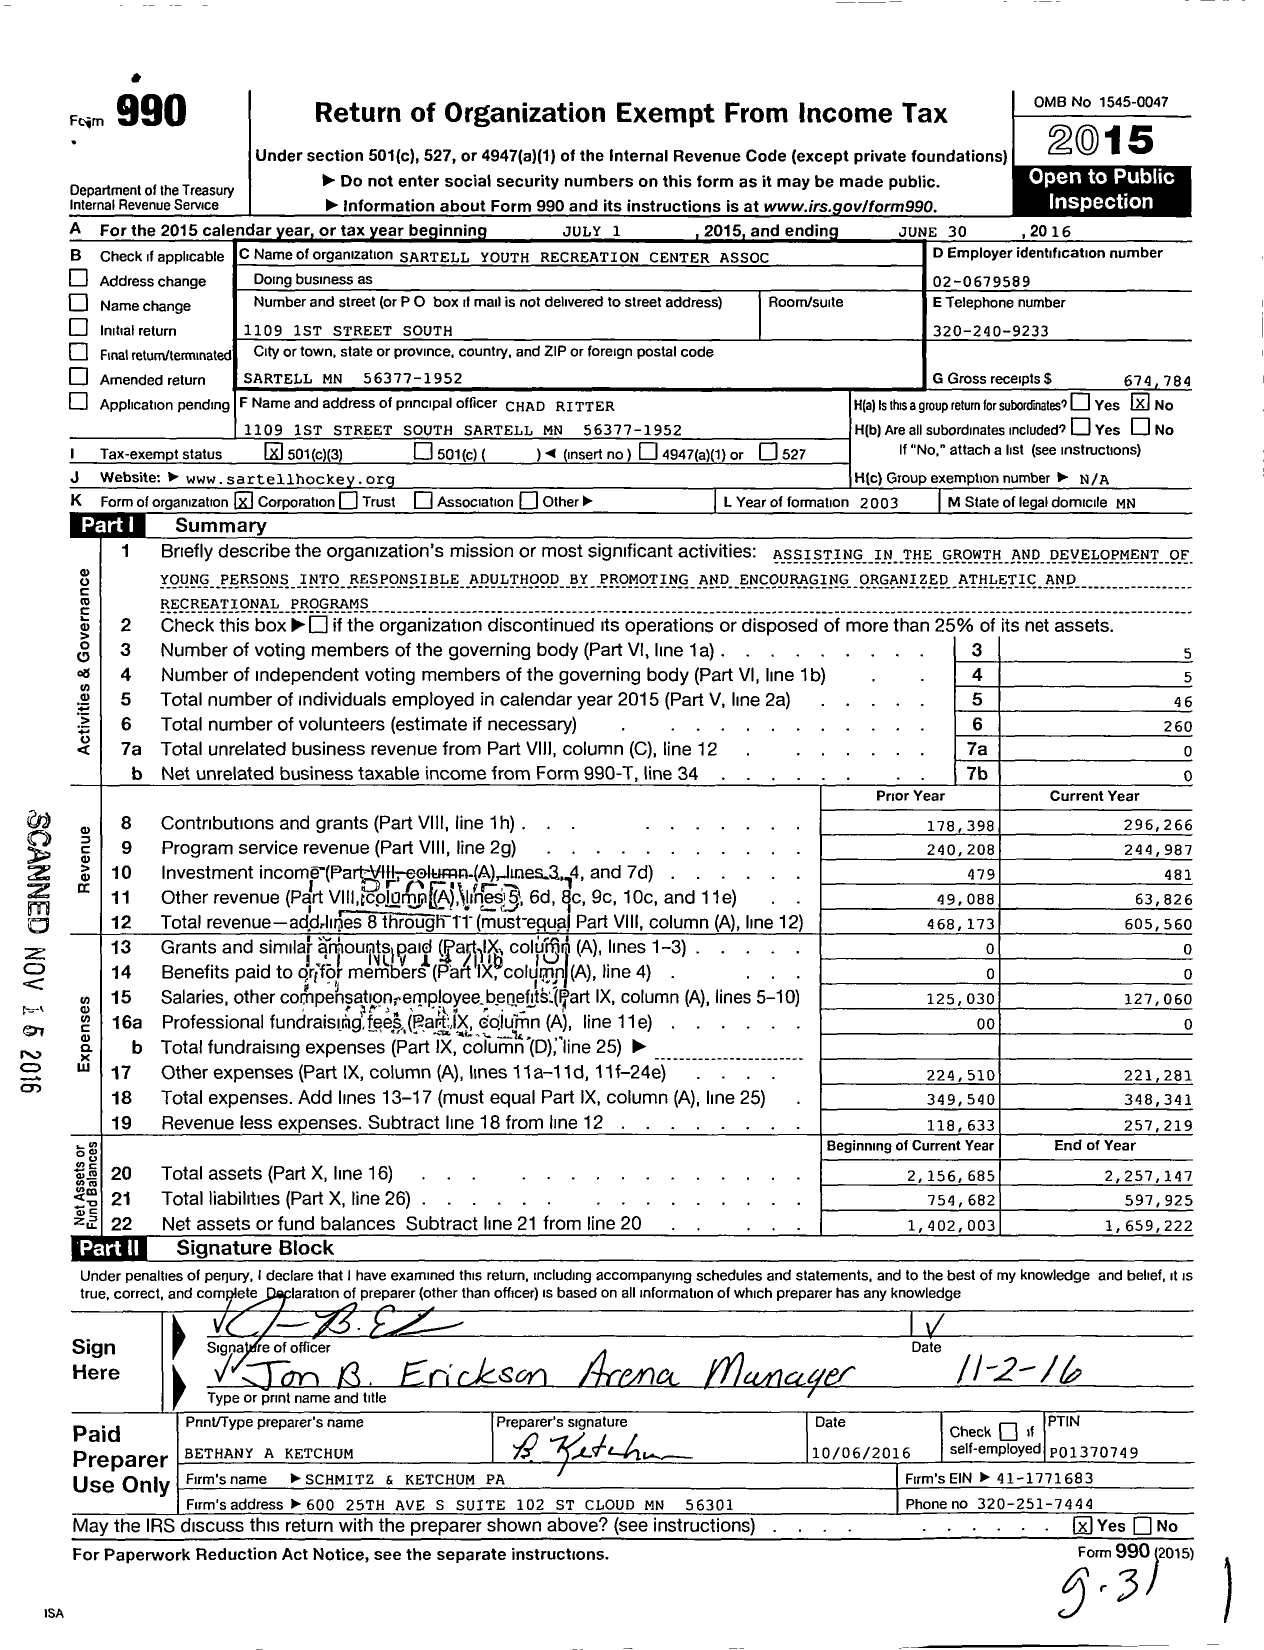 Image of first page of 2015 Form 990 for Sartell Youth Recreation Center Association